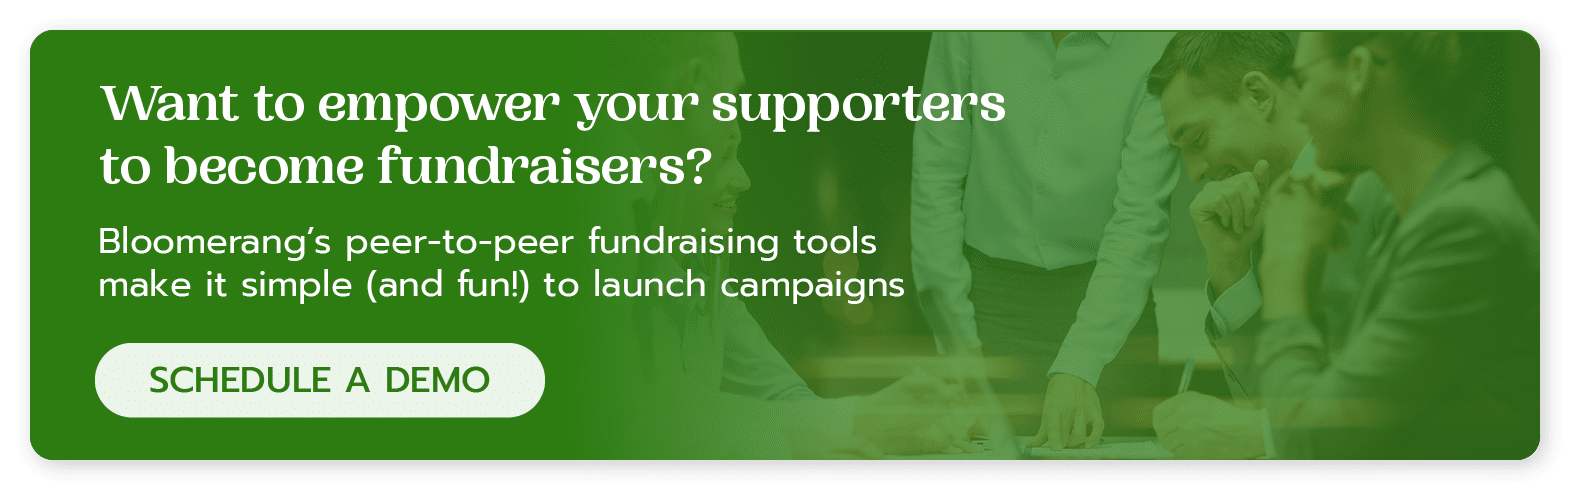 Bloomerang’s peer-to-peer fundraising tools make it simple (and fun!) to launch campaigns. Schedule a demo here.